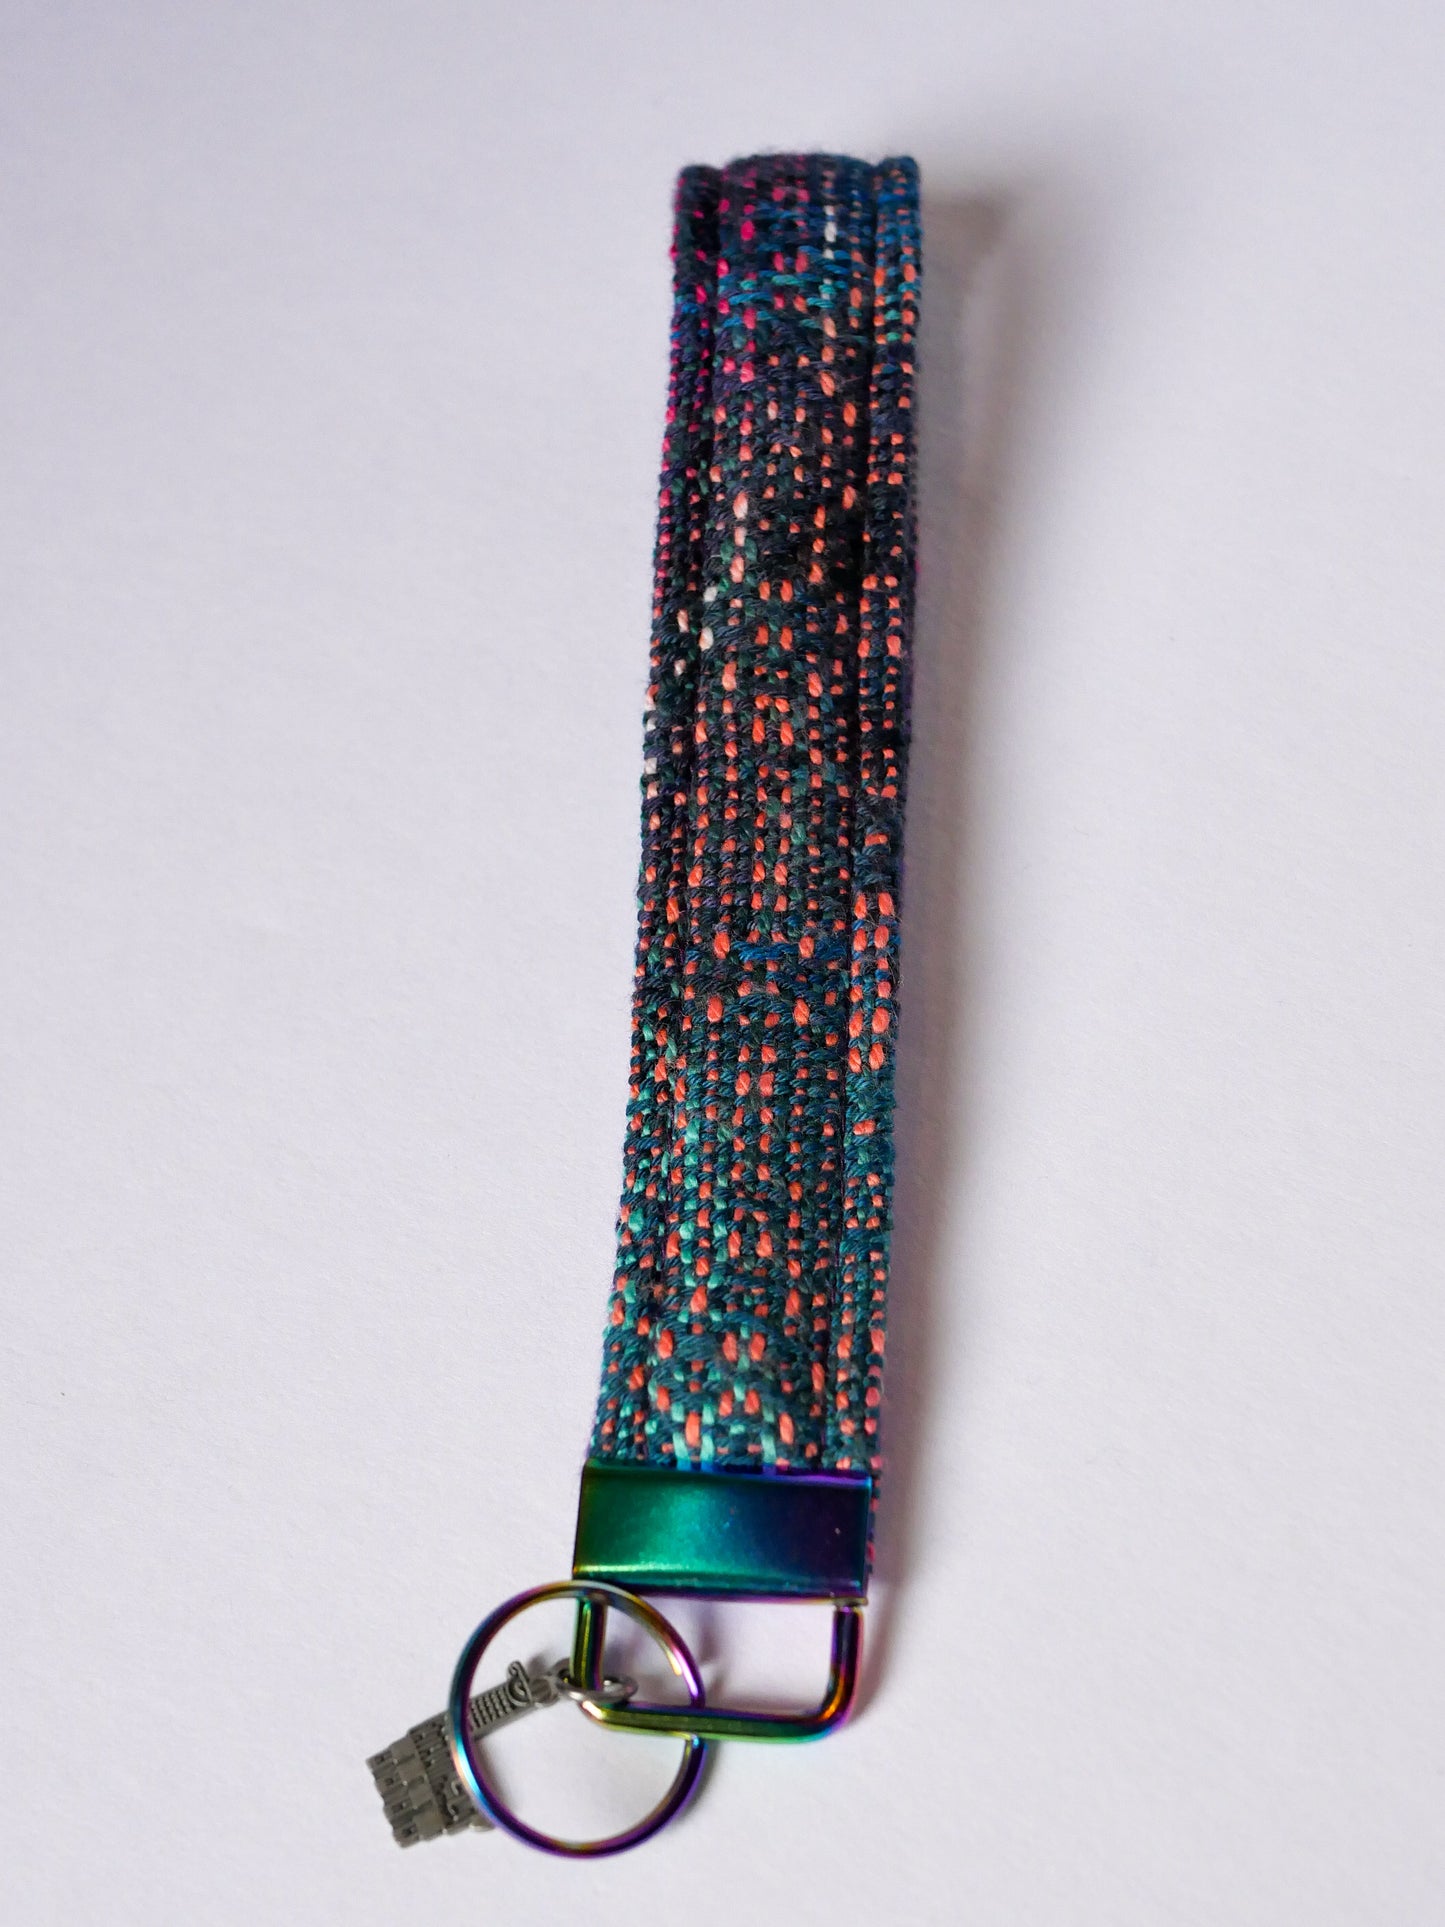 Handwoven Key Fobs - Surfin' Cow